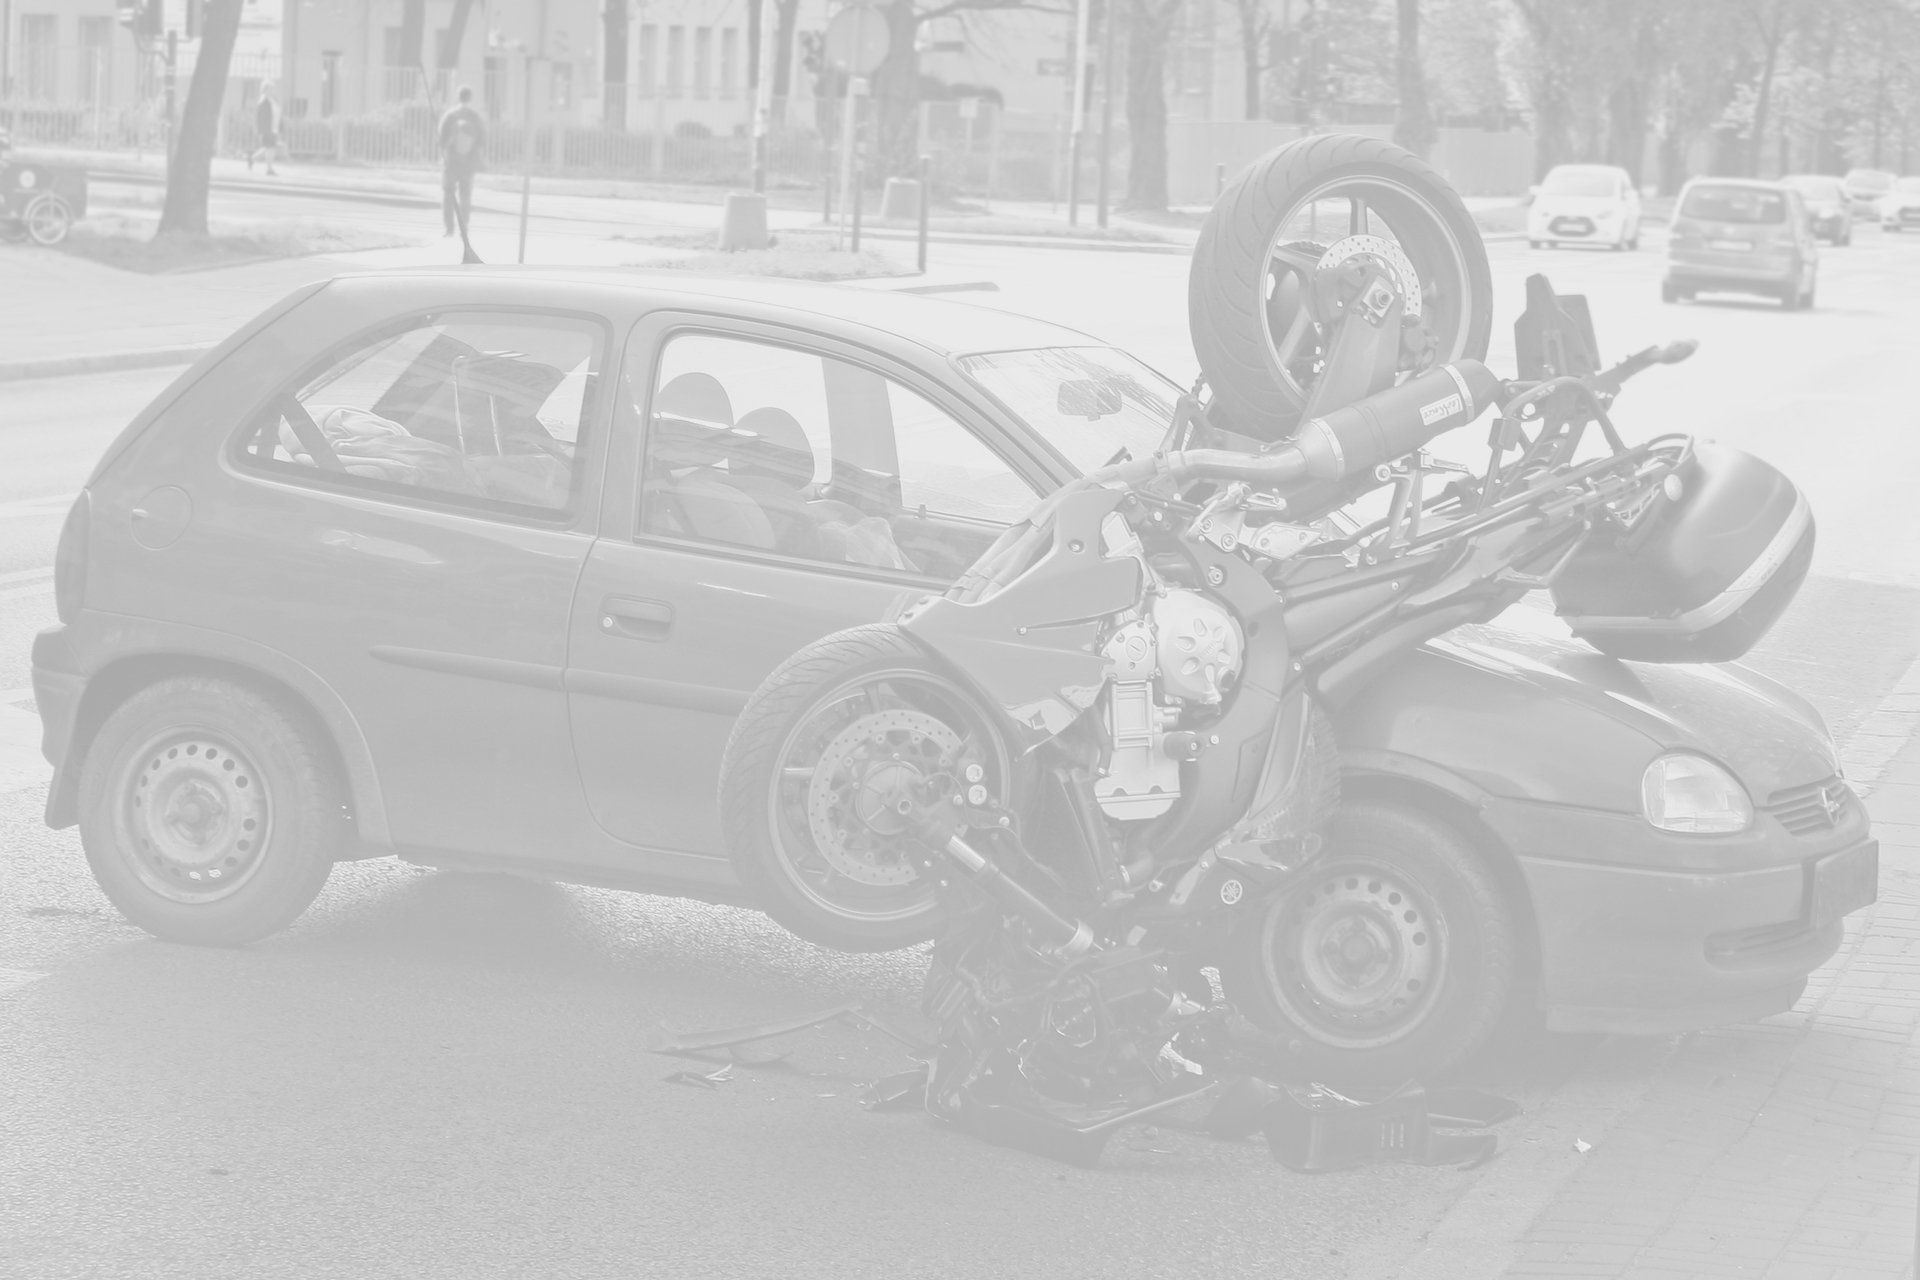 What to Do If You've Been Involved in a Motorcycle Accident